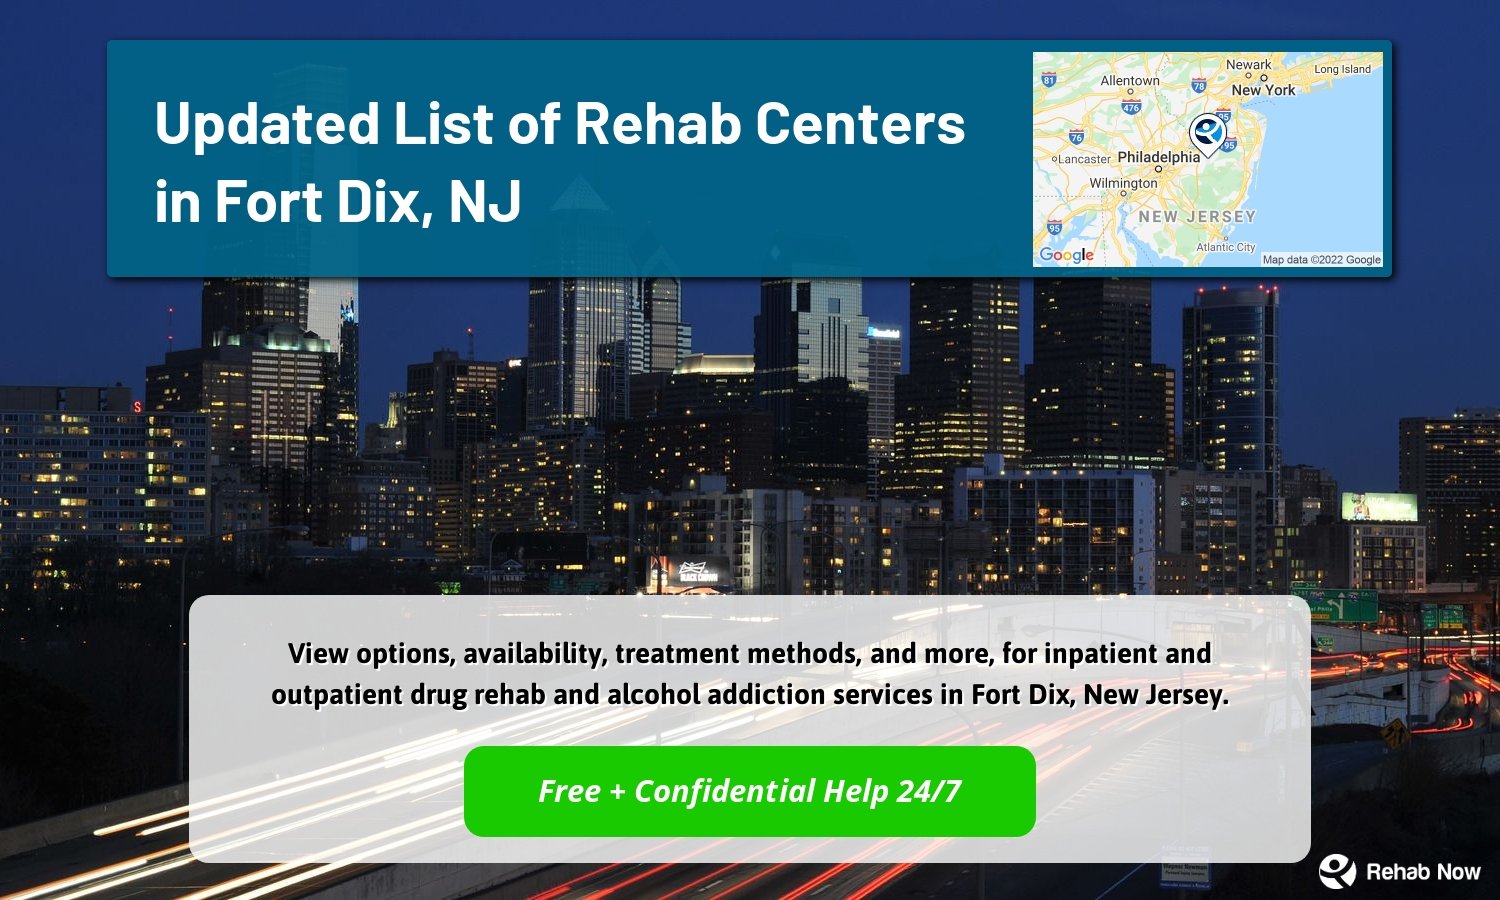 View options, availability, treatment methods, and more, for inpatient and outpatient drug rehab and alcohol addiction services in Fort Dix, New Jersey.